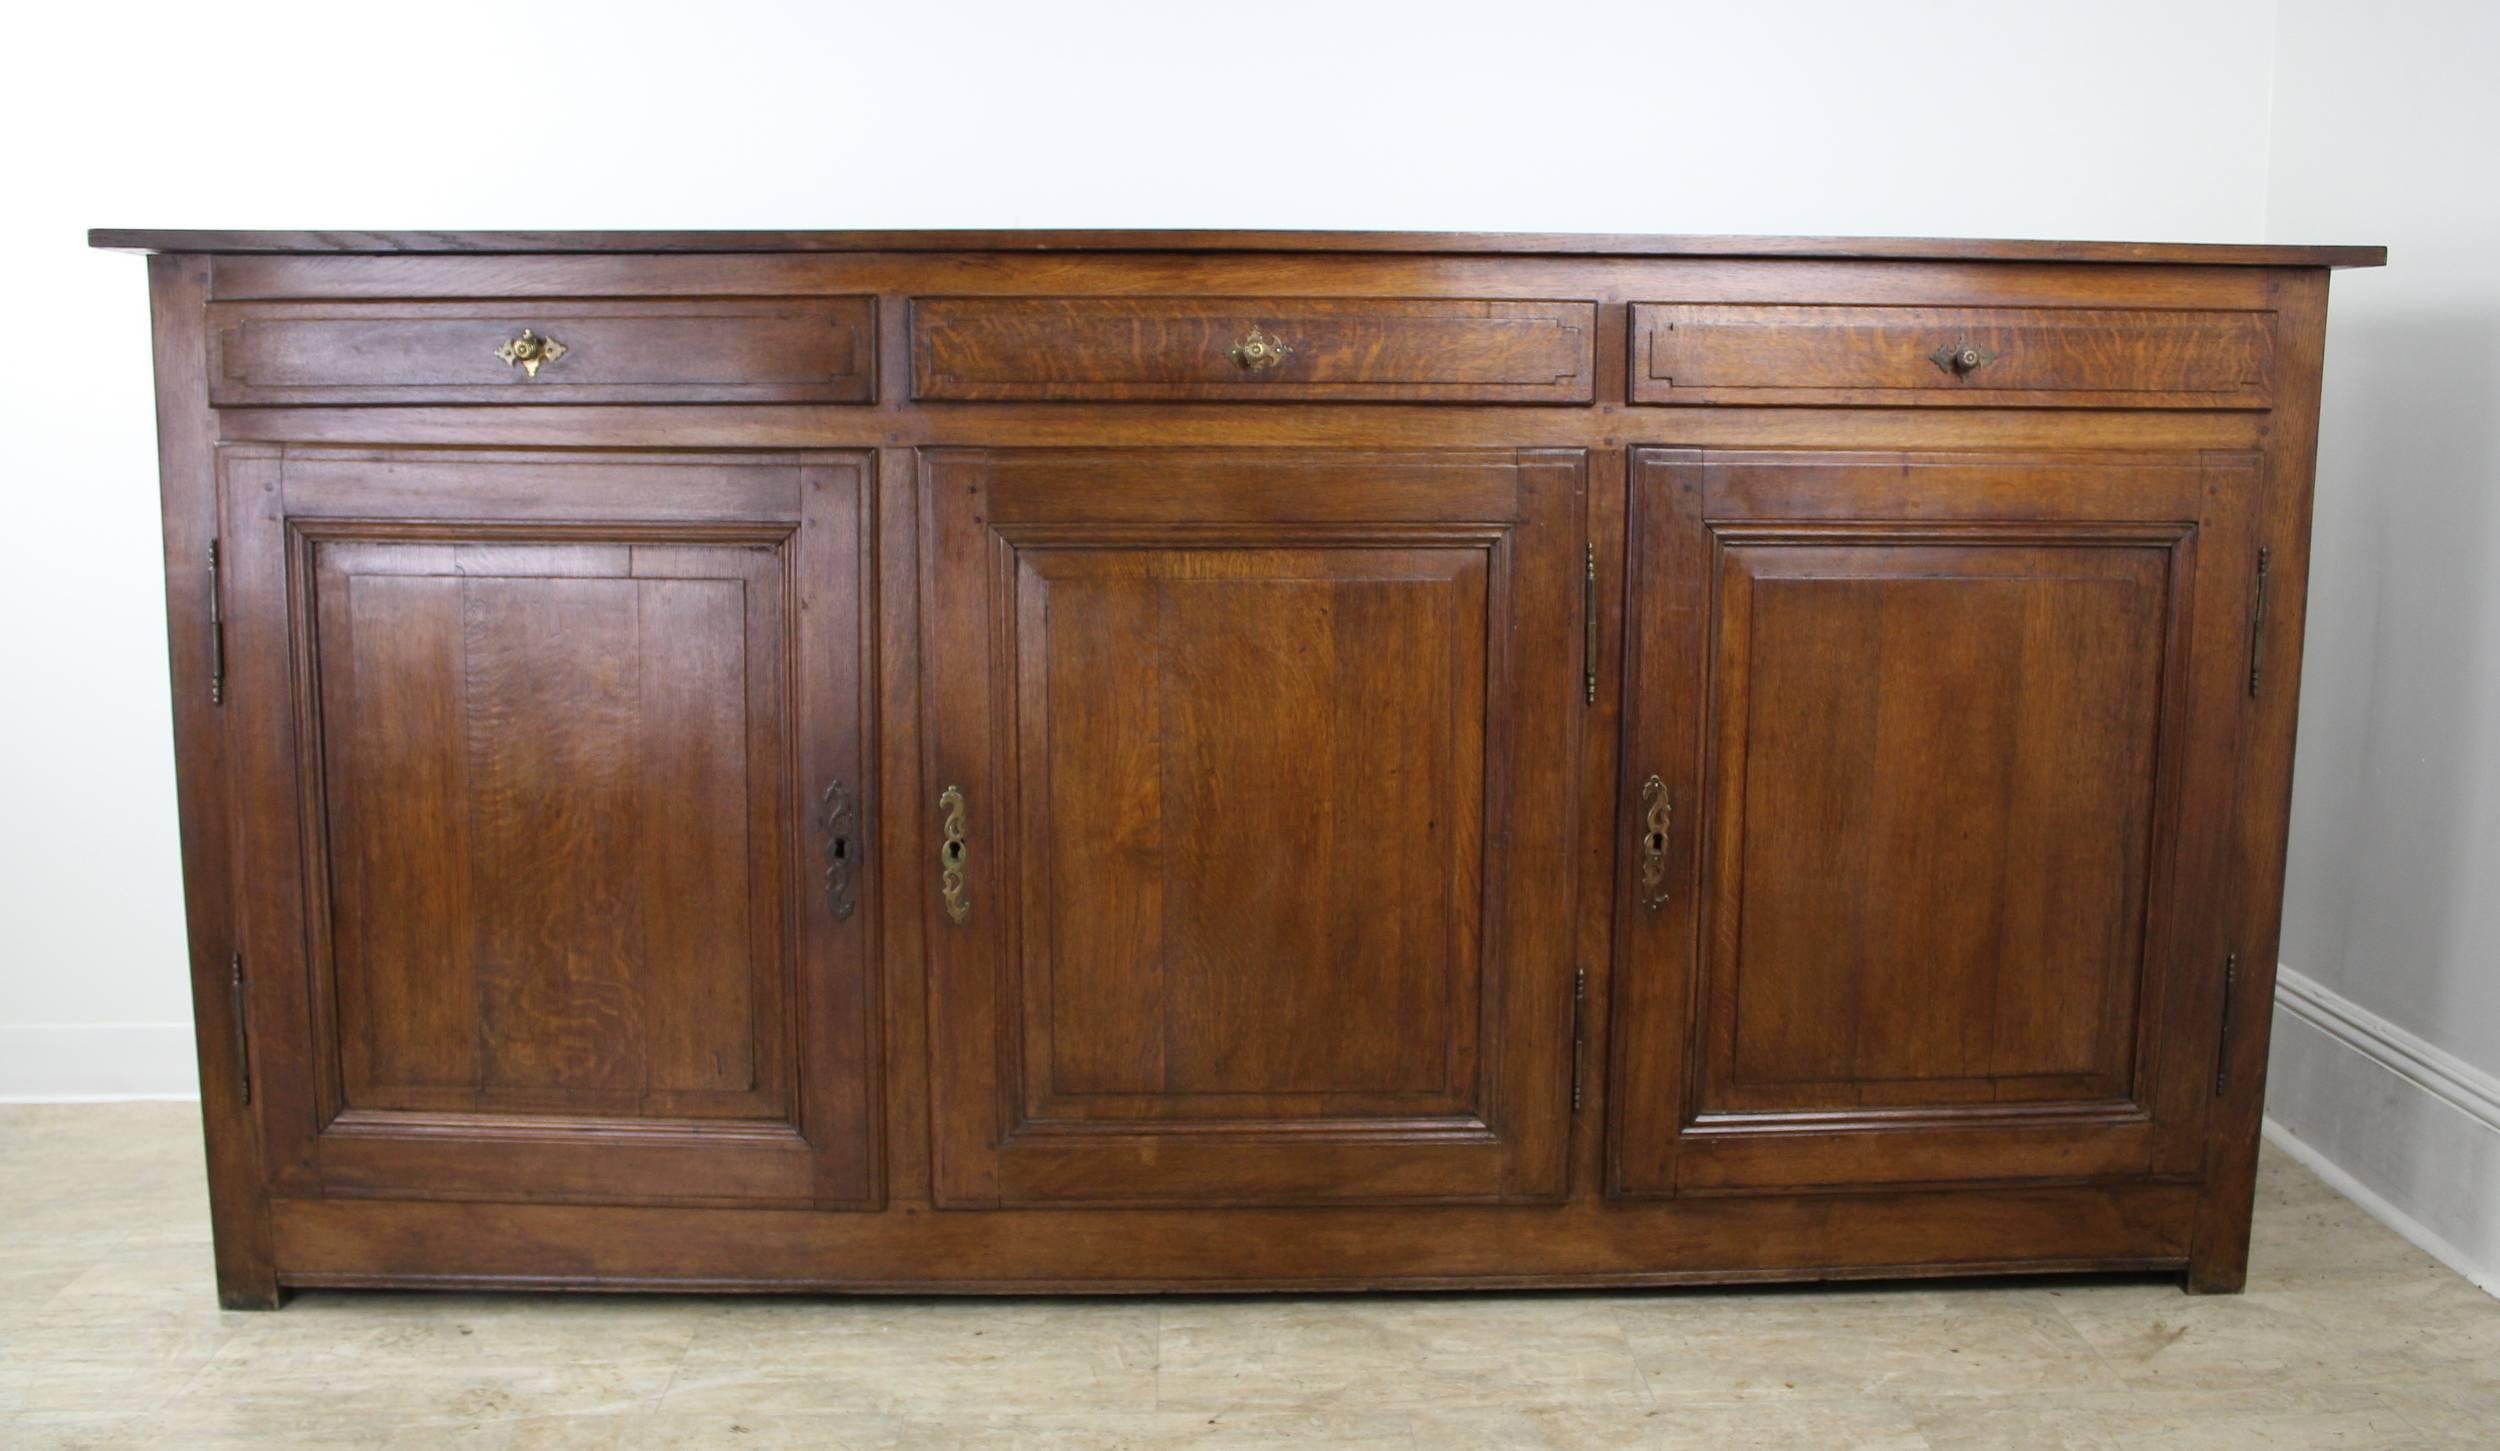 Dramatic piece with great storage in three shelved compartments with three drawers above. The doors are well panelled as are the sides. Warm dark color and nicely patinated grain. There is a simply shaped apron. Long door hinges and escutcheons are